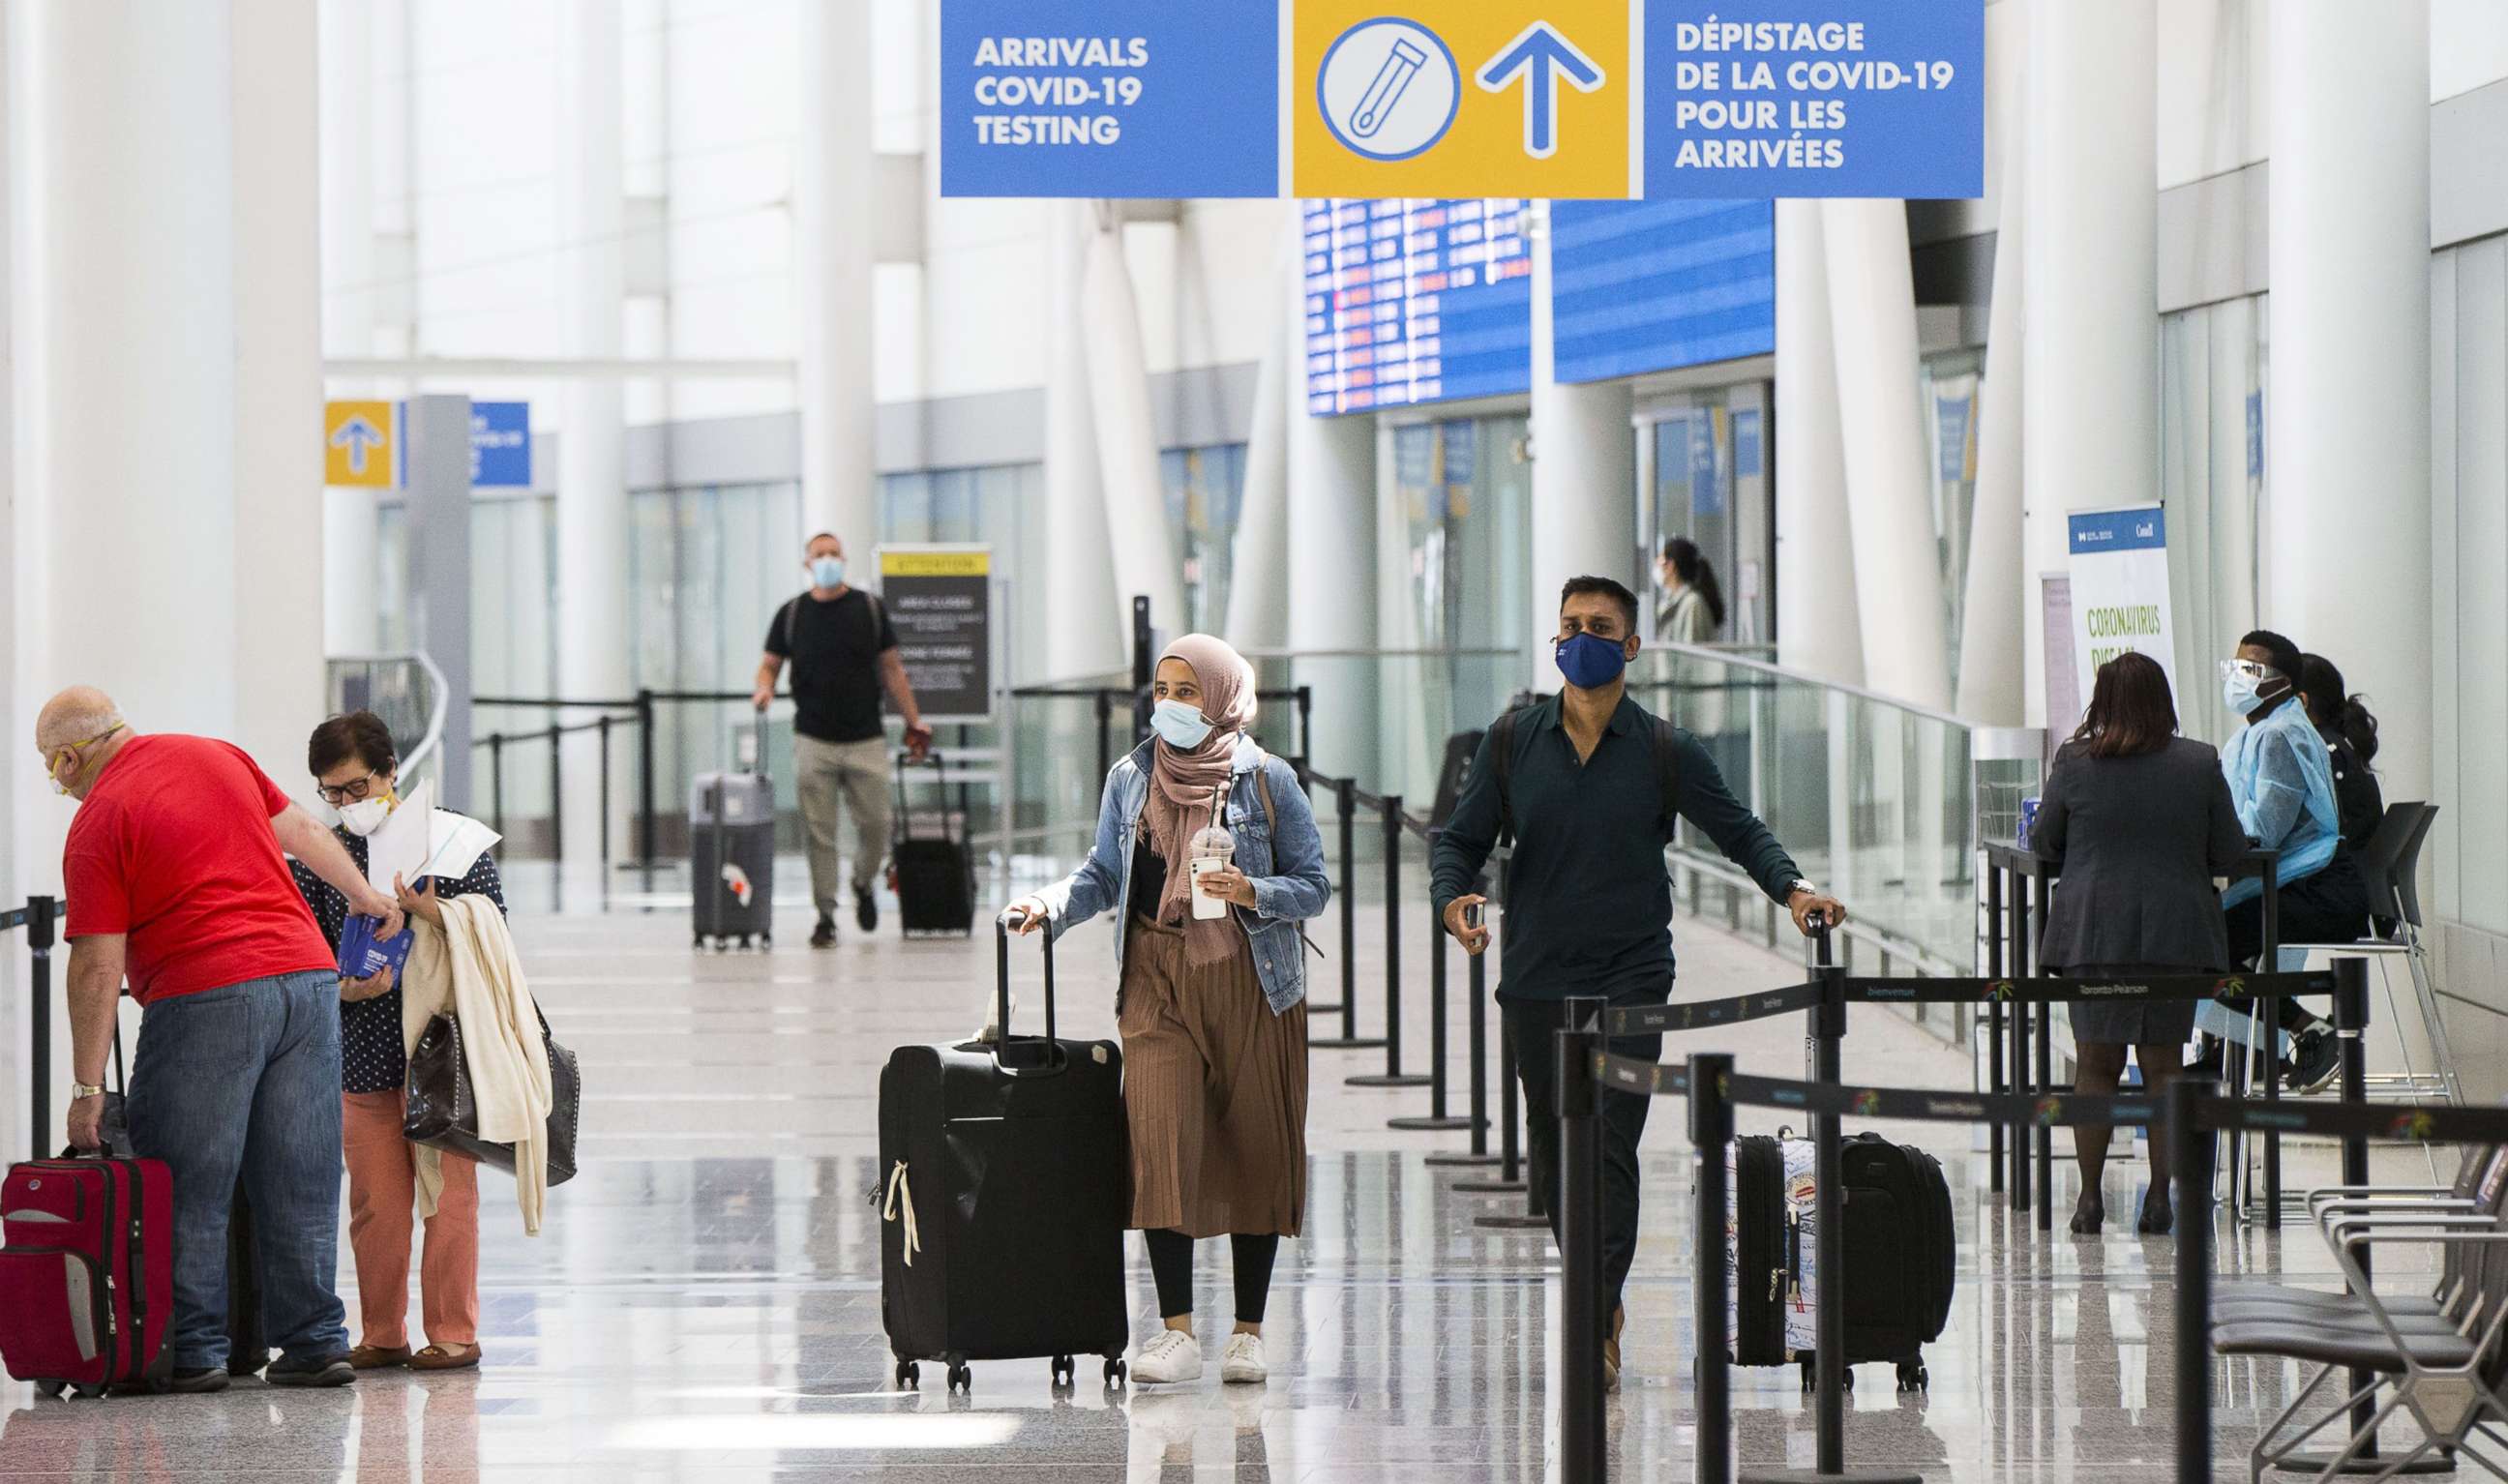 PHOTO: In this July 5, 2021, file photo, travelers wearing face masks walk out of the arrivals hall at Toronto Pearson International Airport in Mississauga, Ontario, Canada.